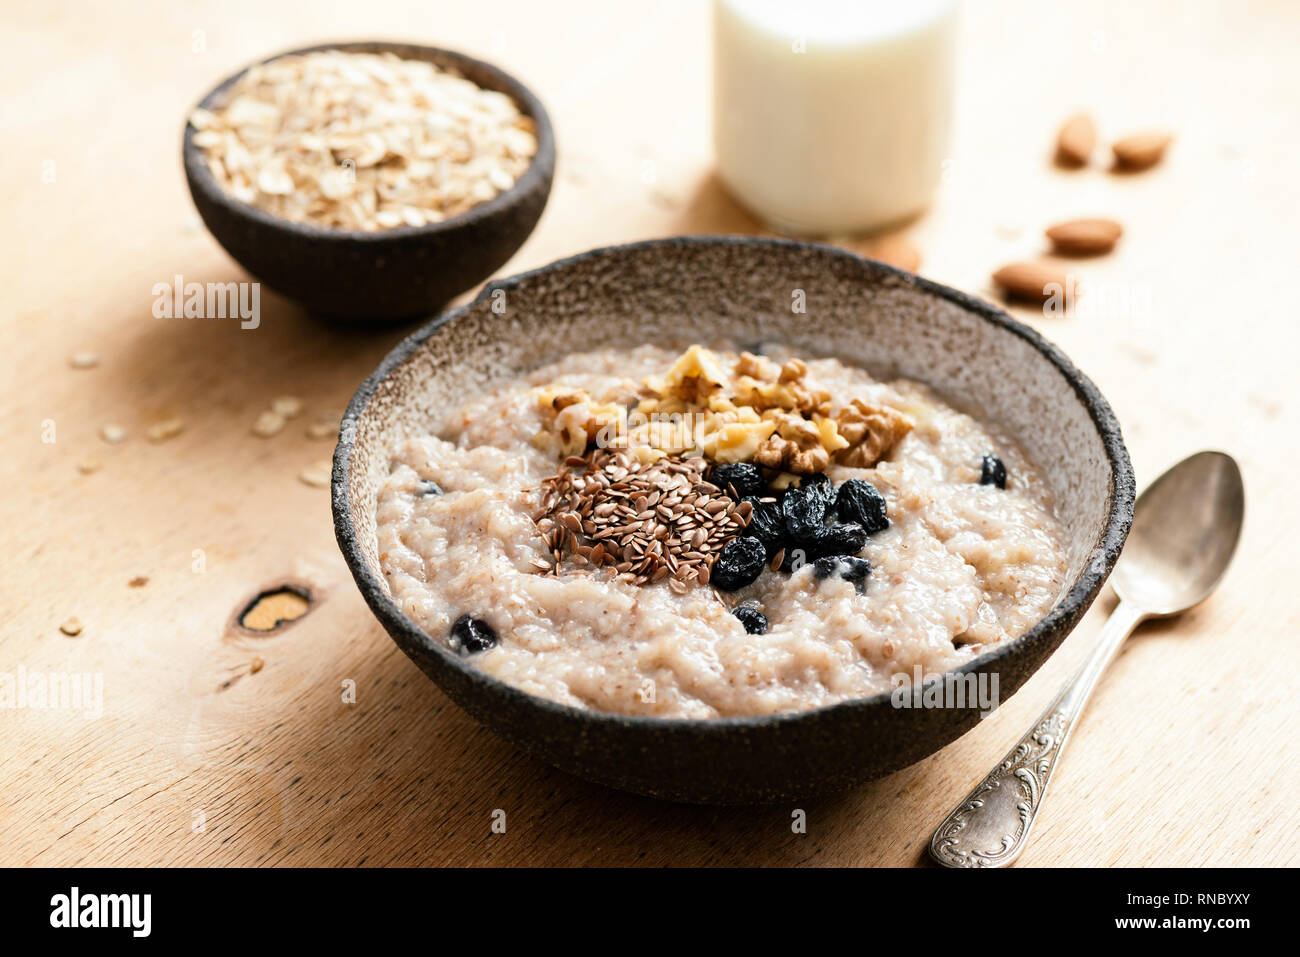 Oatmeal porridge with raisin and seeds in bowl on wooden table. Tasty healthy breakfast. Morning vegan meal Stock Photo